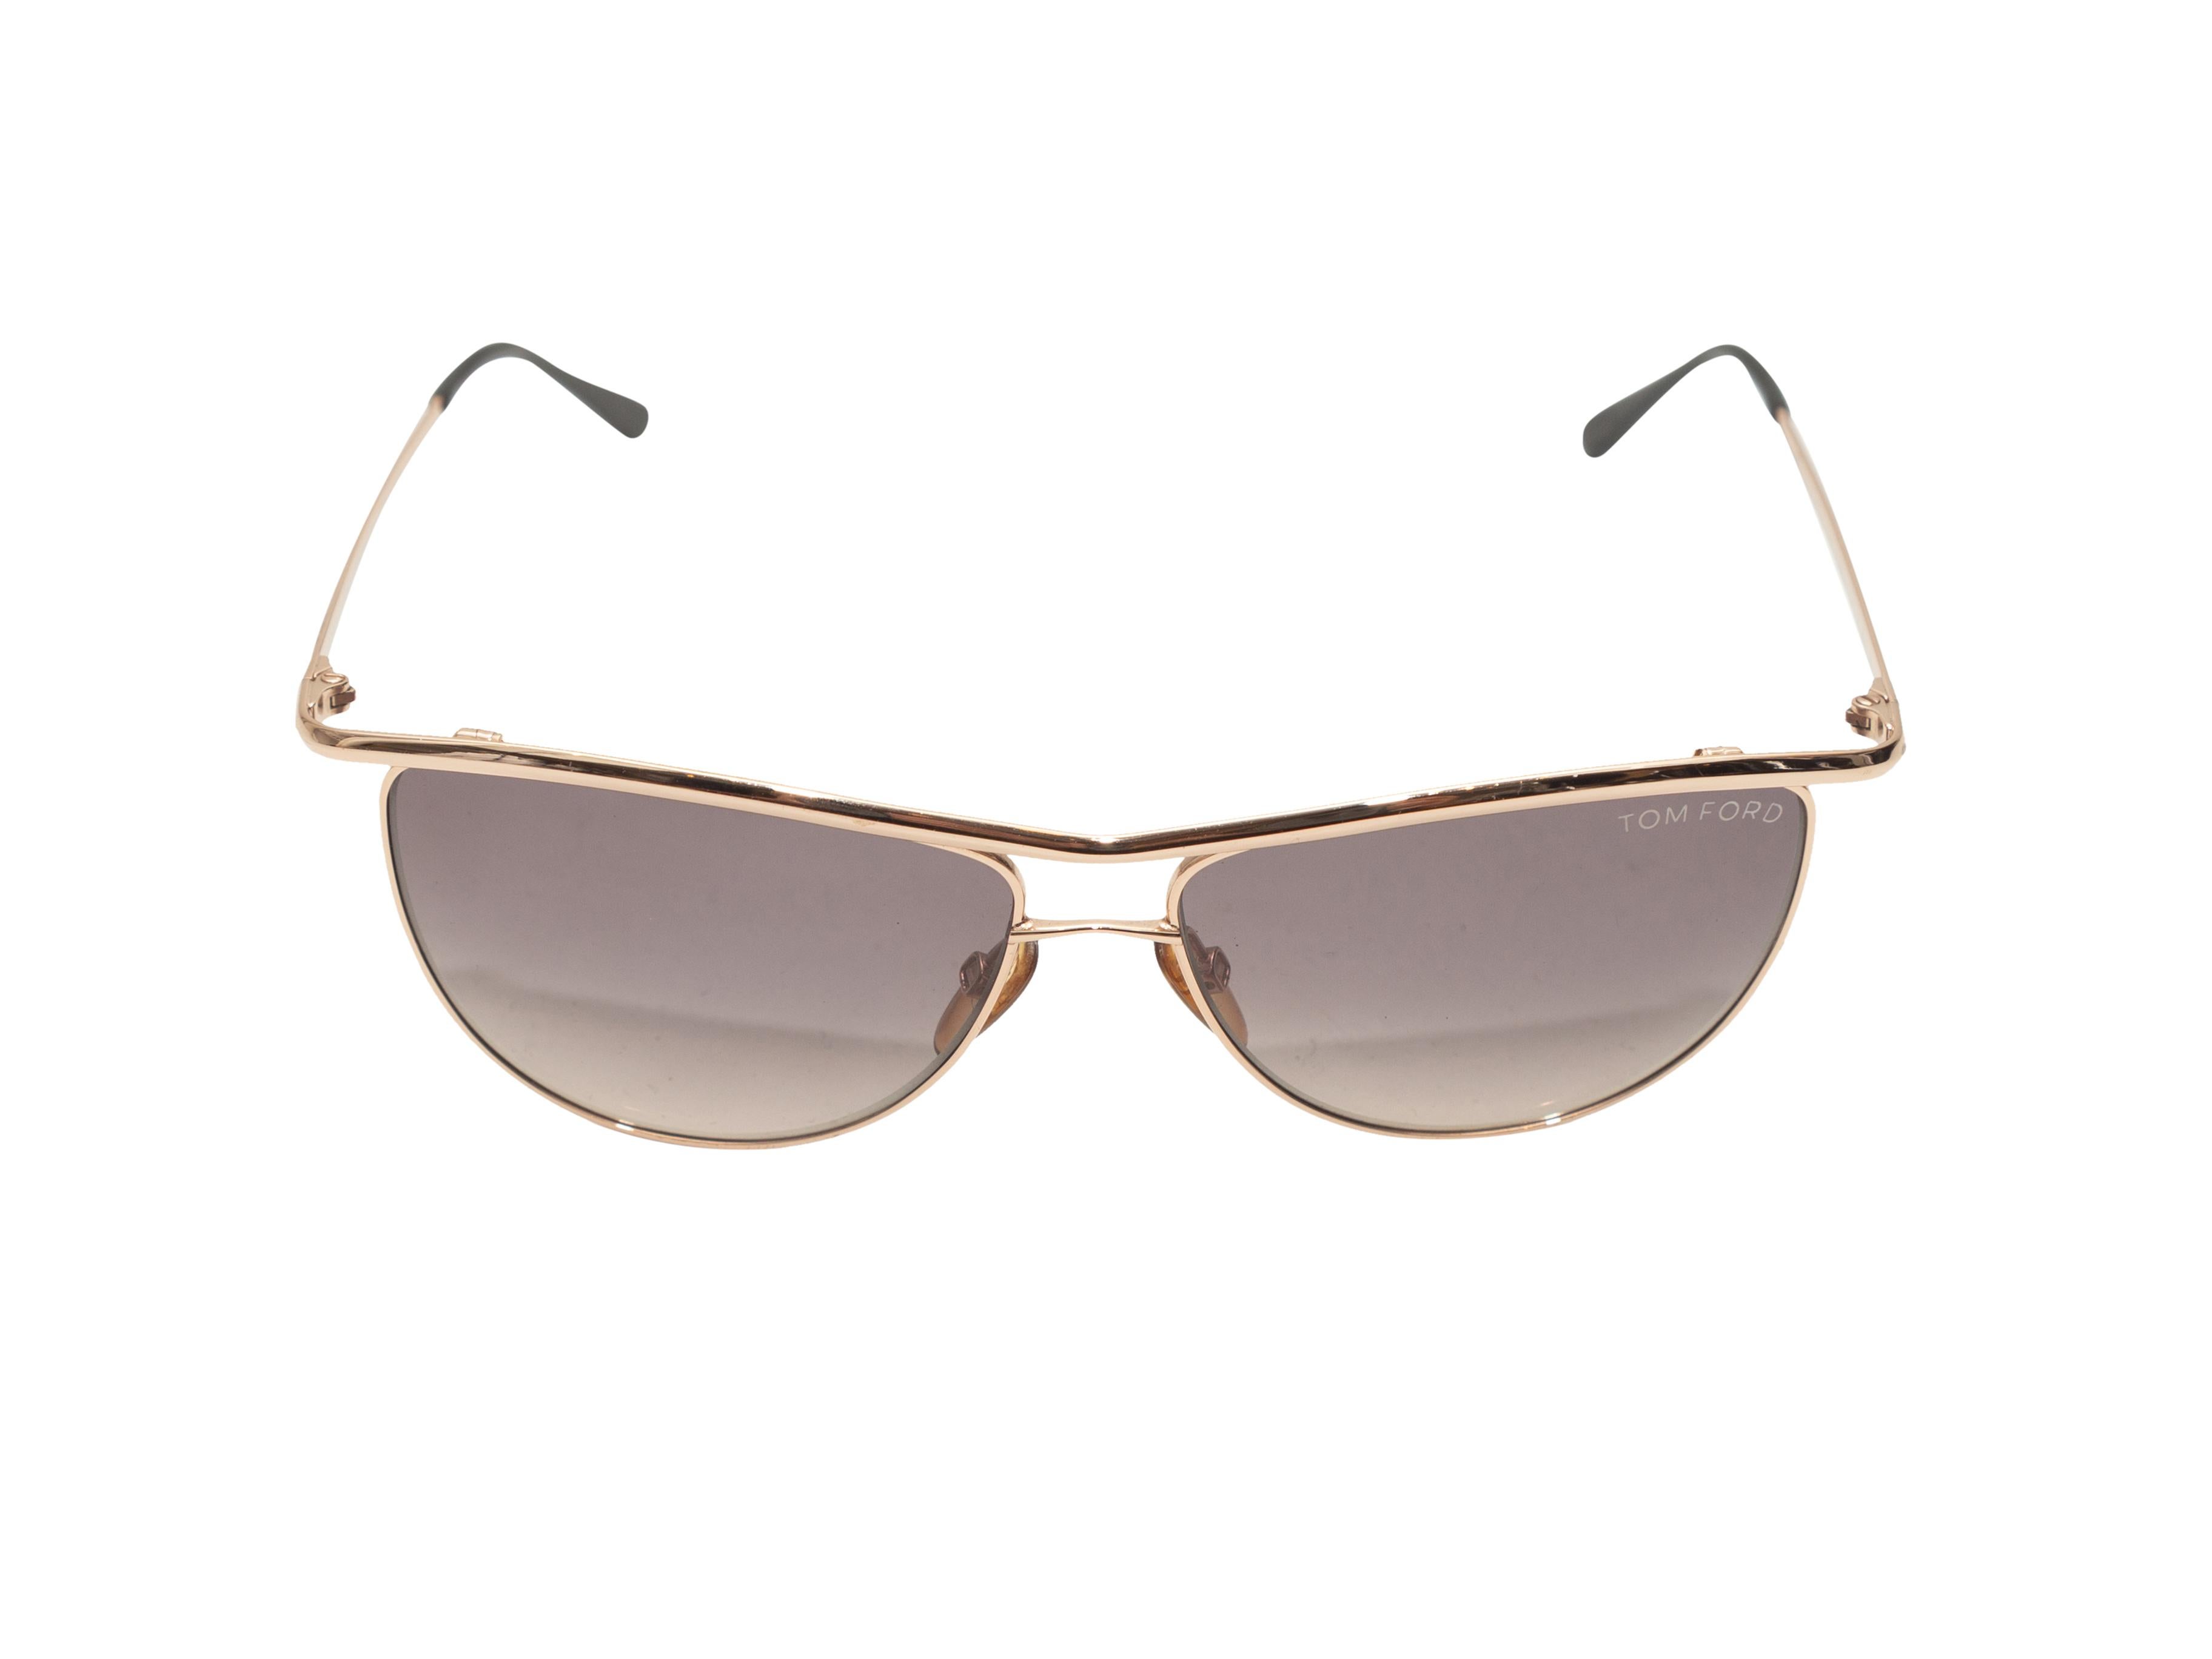 Product details: Gold metal Helene aviator sunglasses by Tom Ford. Grey tinted lenses. 5.5